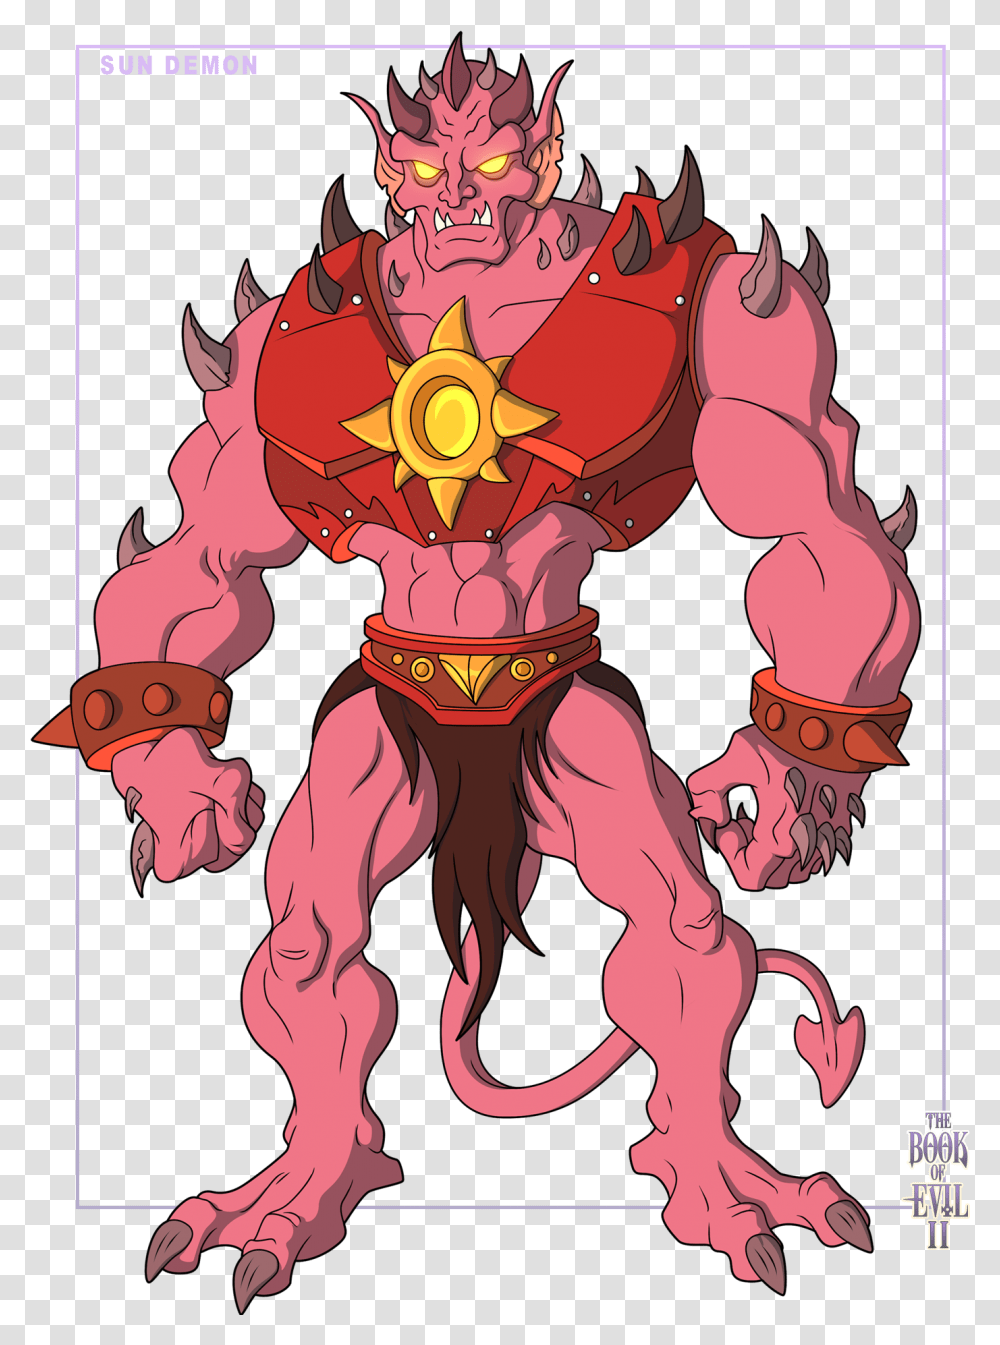 This Just Got Harder He Man Groans Cartoon, Costume, Sweets, Comics, Book Transparent Png